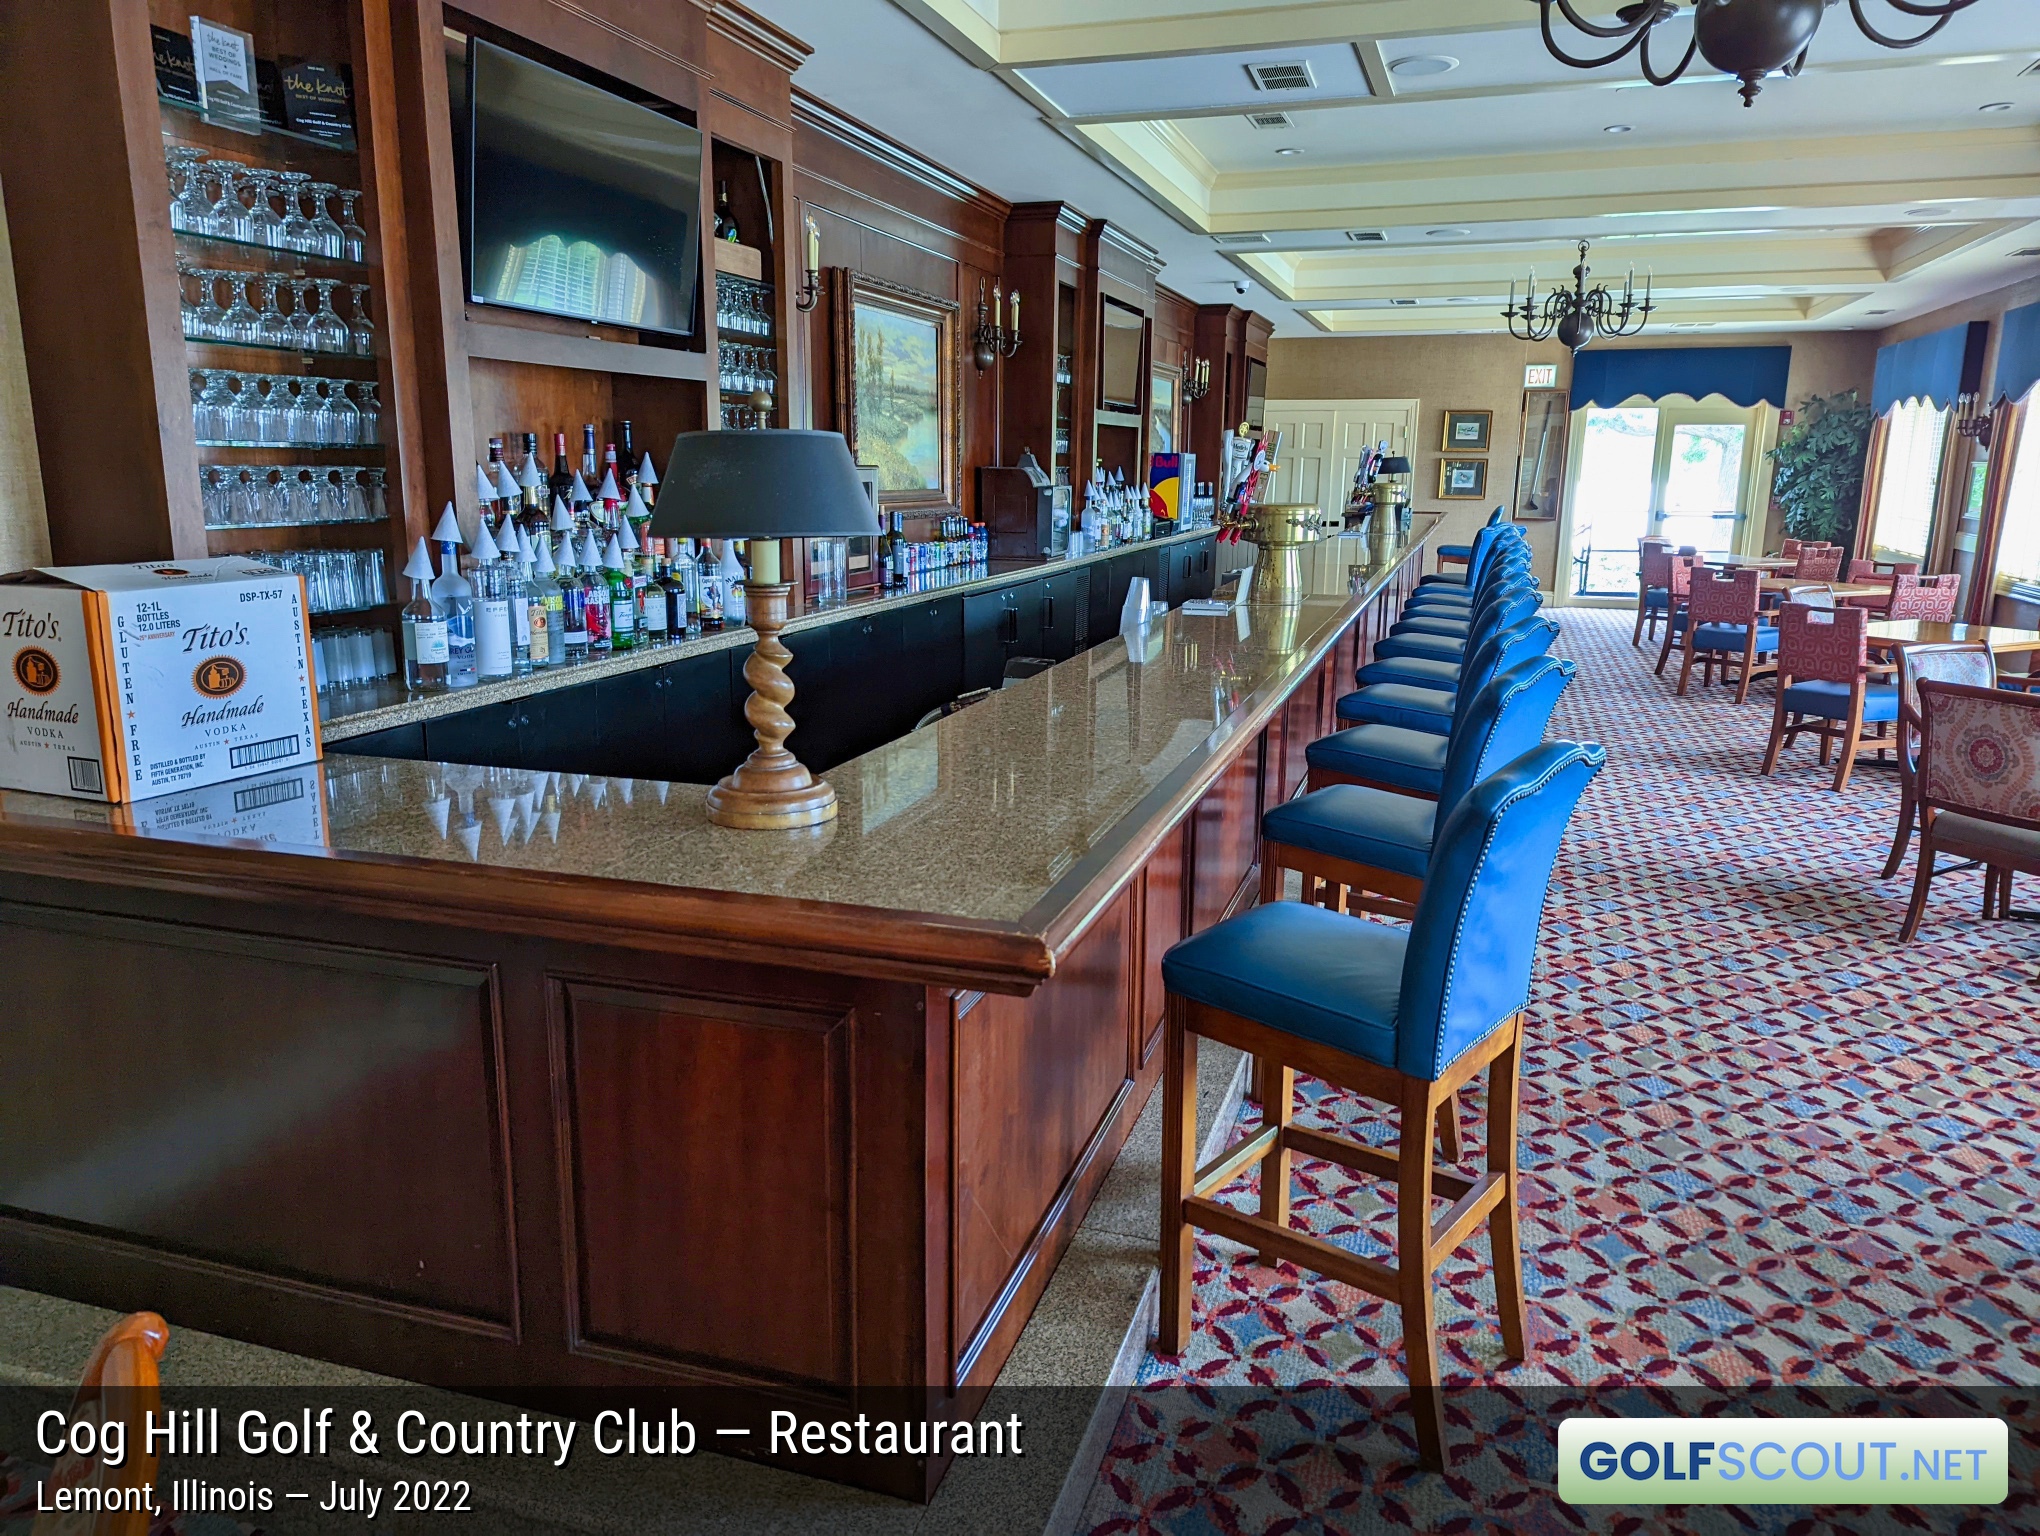 Photo of the restaurant at Cog Hill Course #1 in Lemont, Illinois. The bar in one of the many dining areas in the clubhouse.